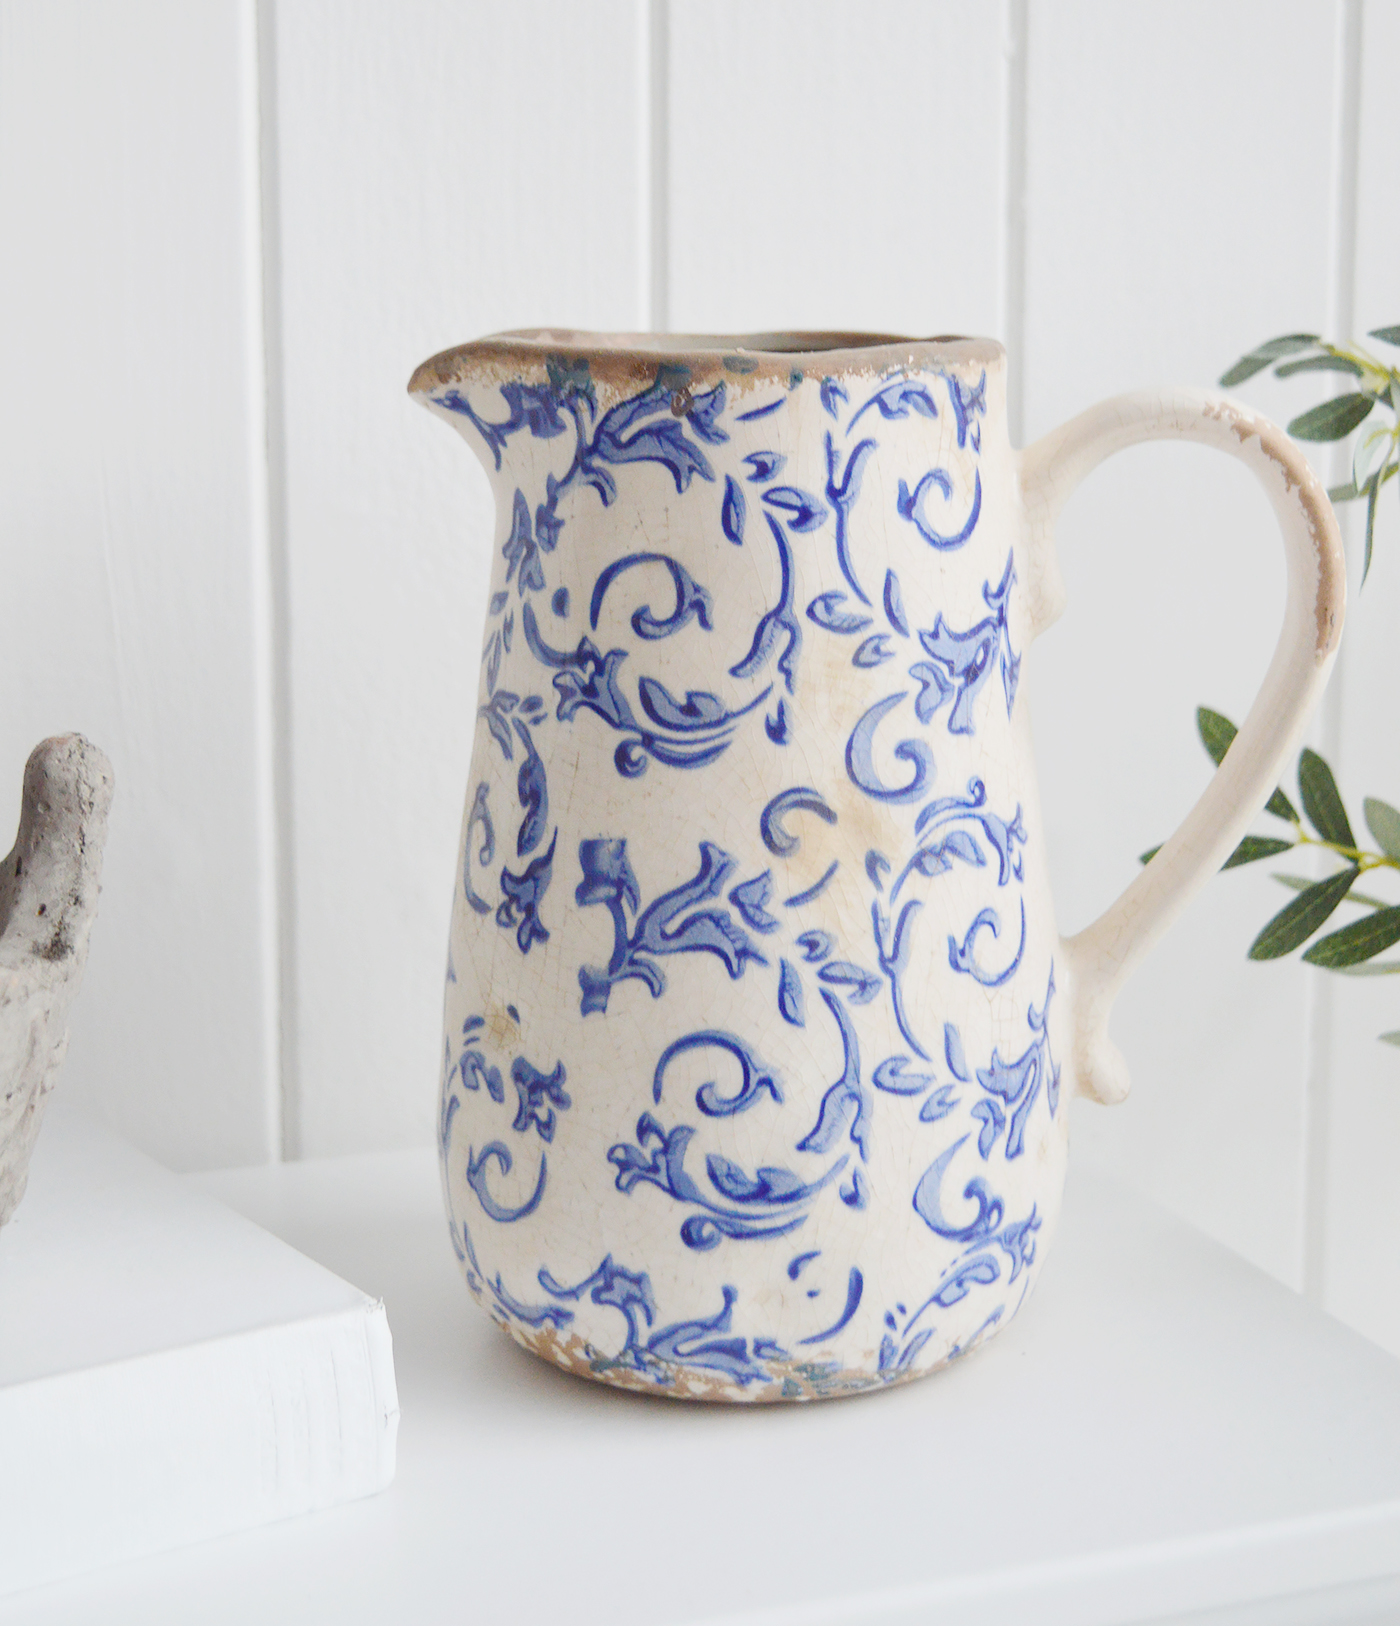 Vintage Blue and white floral jug. Blue and white home decor for New England Style interiors for coastal, country and city home interiors from The White Lighthouse